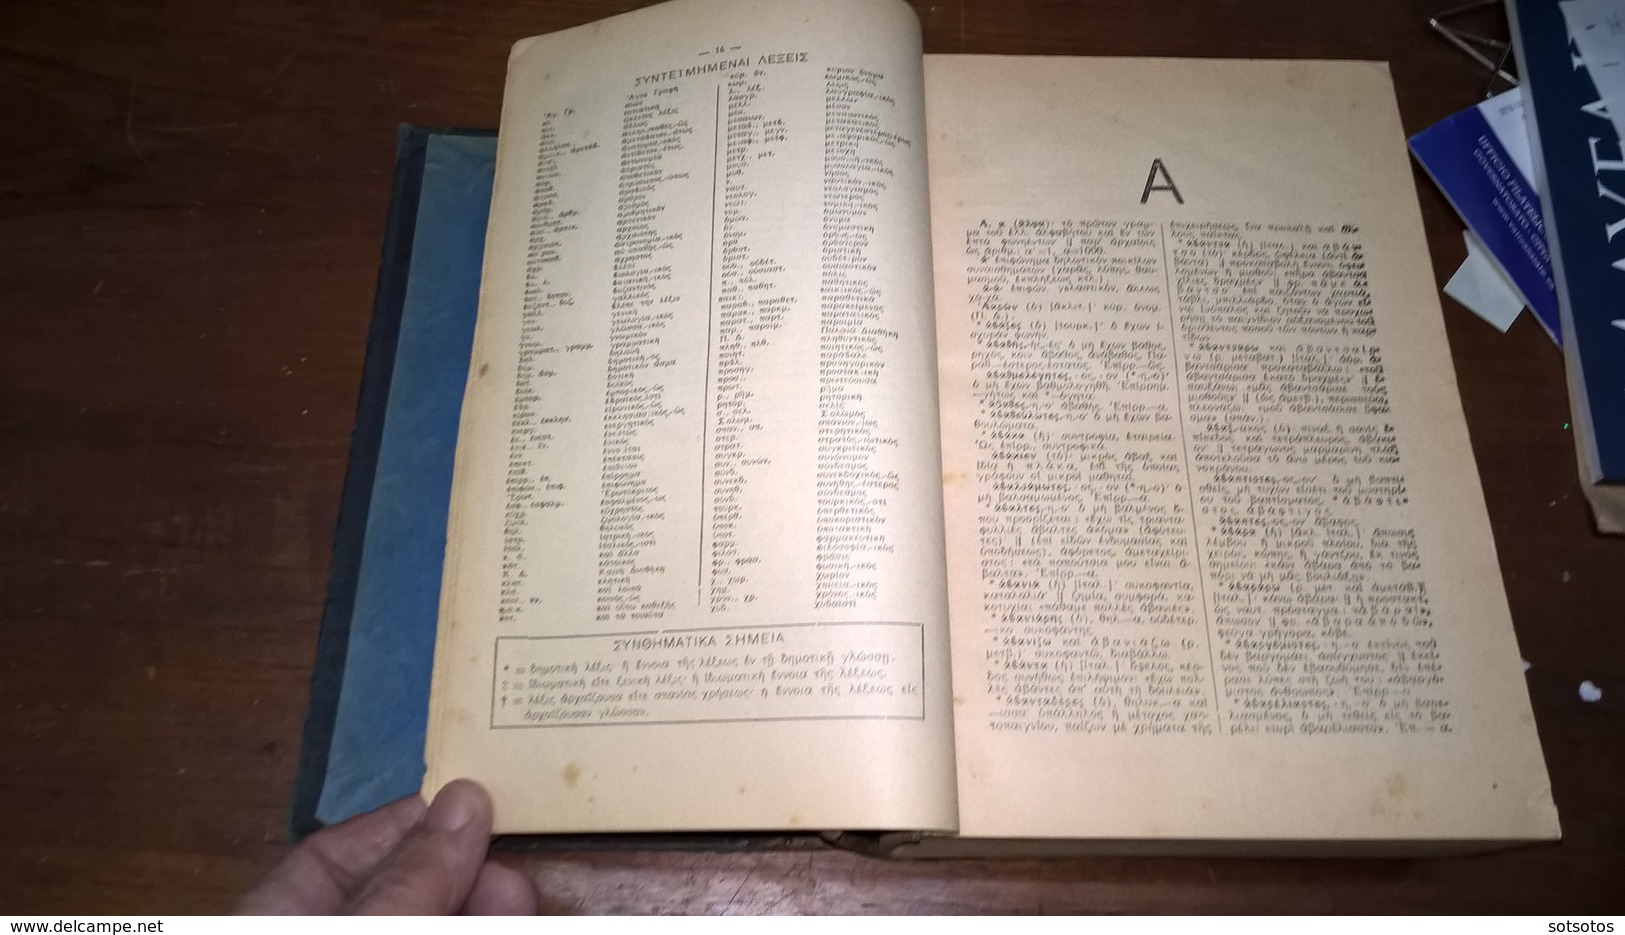 VERY RARE GREEK BOOK: Lexicon of the Greek Language (1922) Ed. PROÏAS - 2 vol. 2664 pages + 8 pgs of complement - Cover